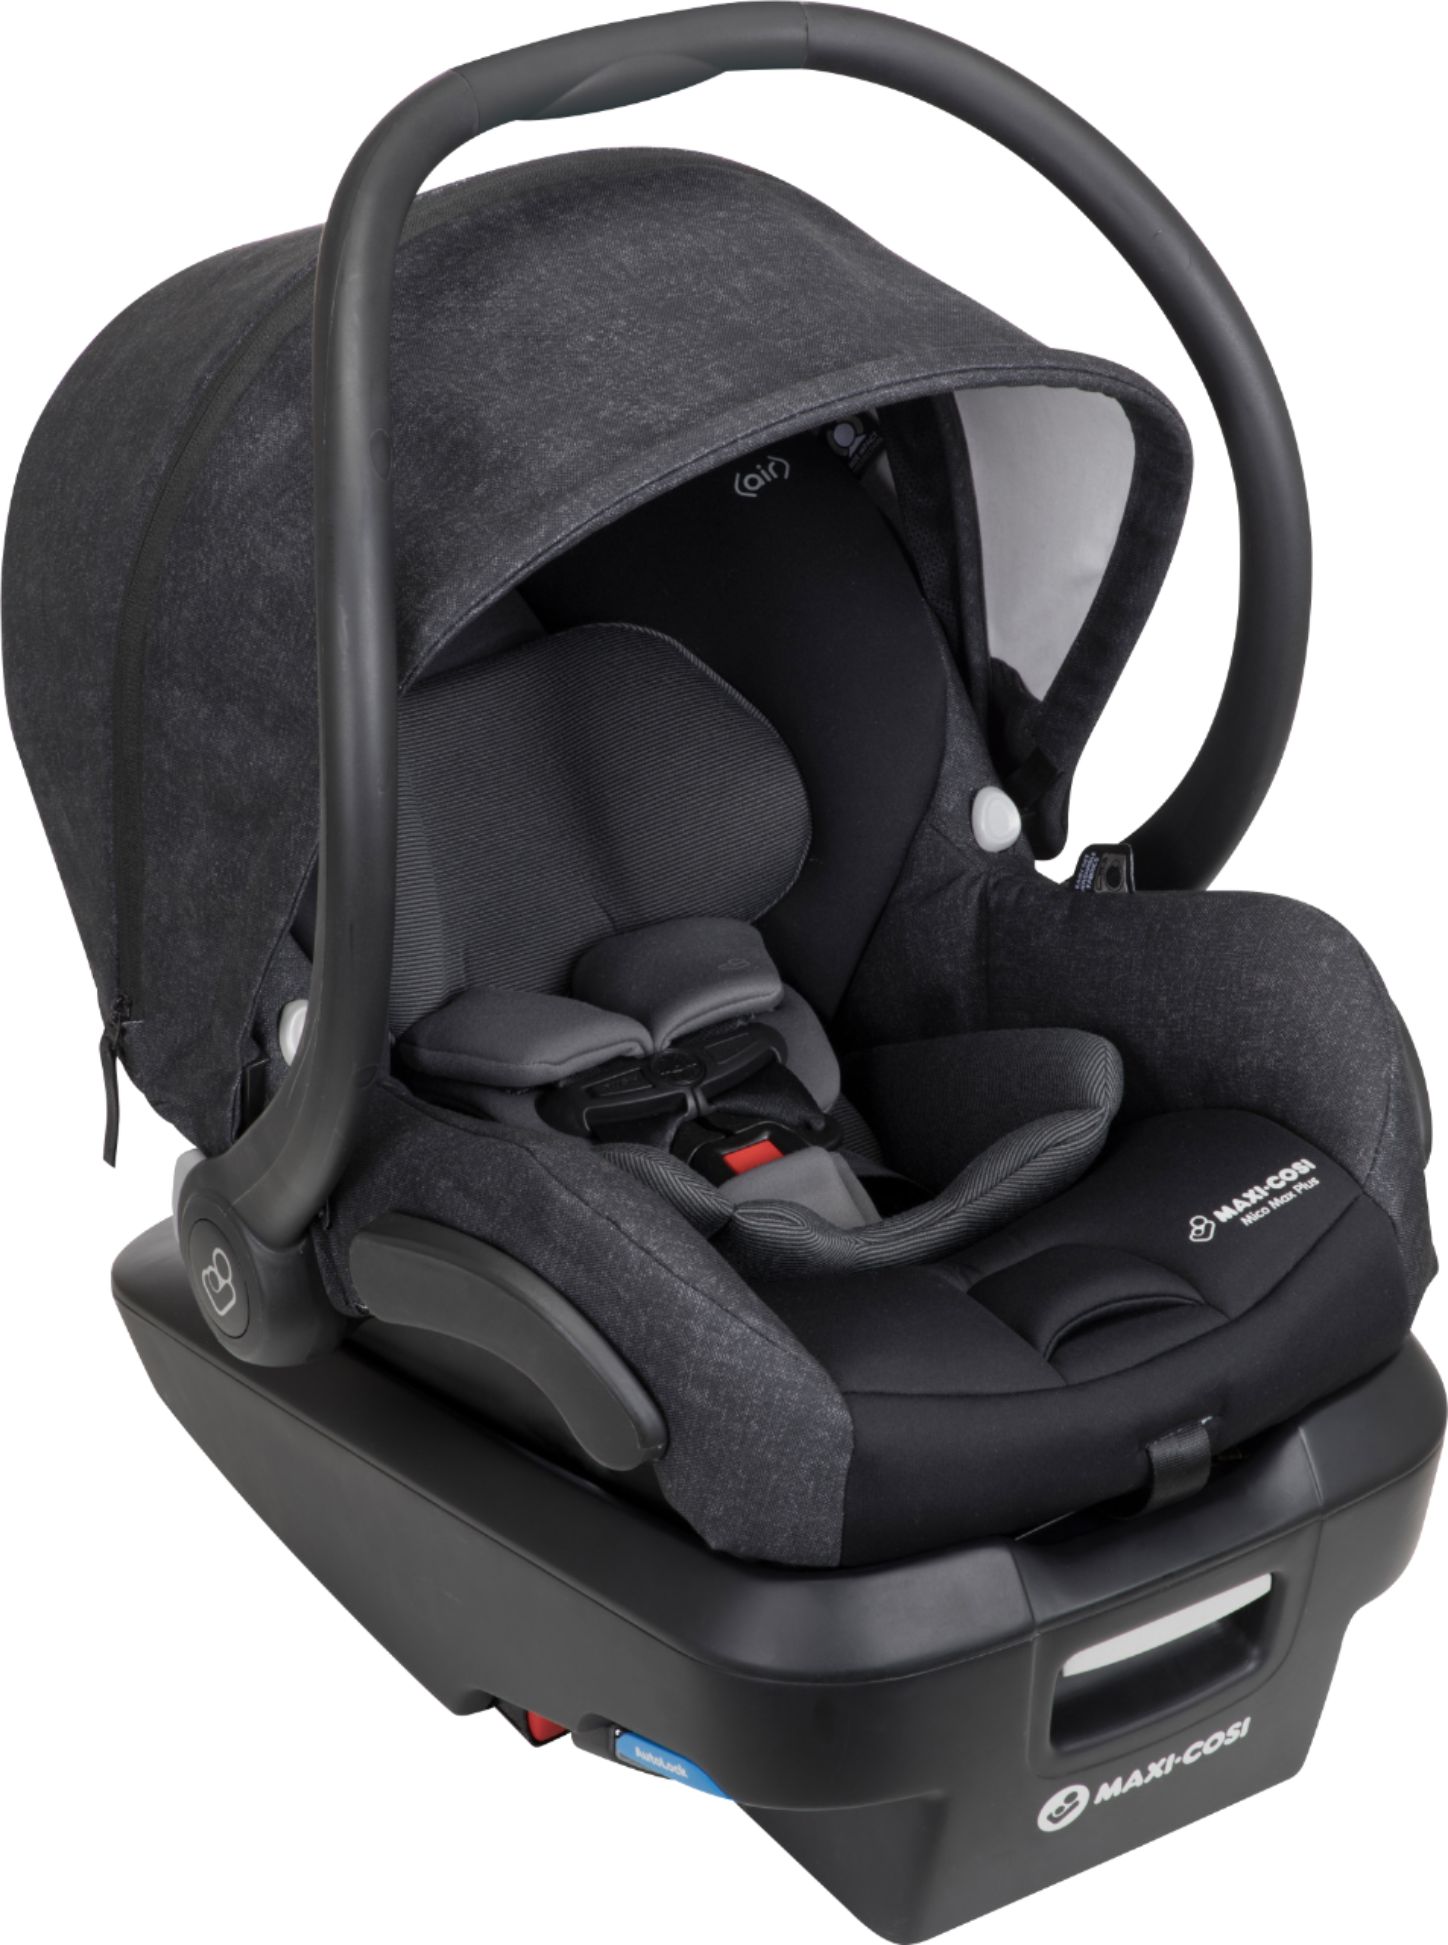 Brand New! Maxi-Cosi Mico Infant Car Seat Cover Free Shipping!! Grey 